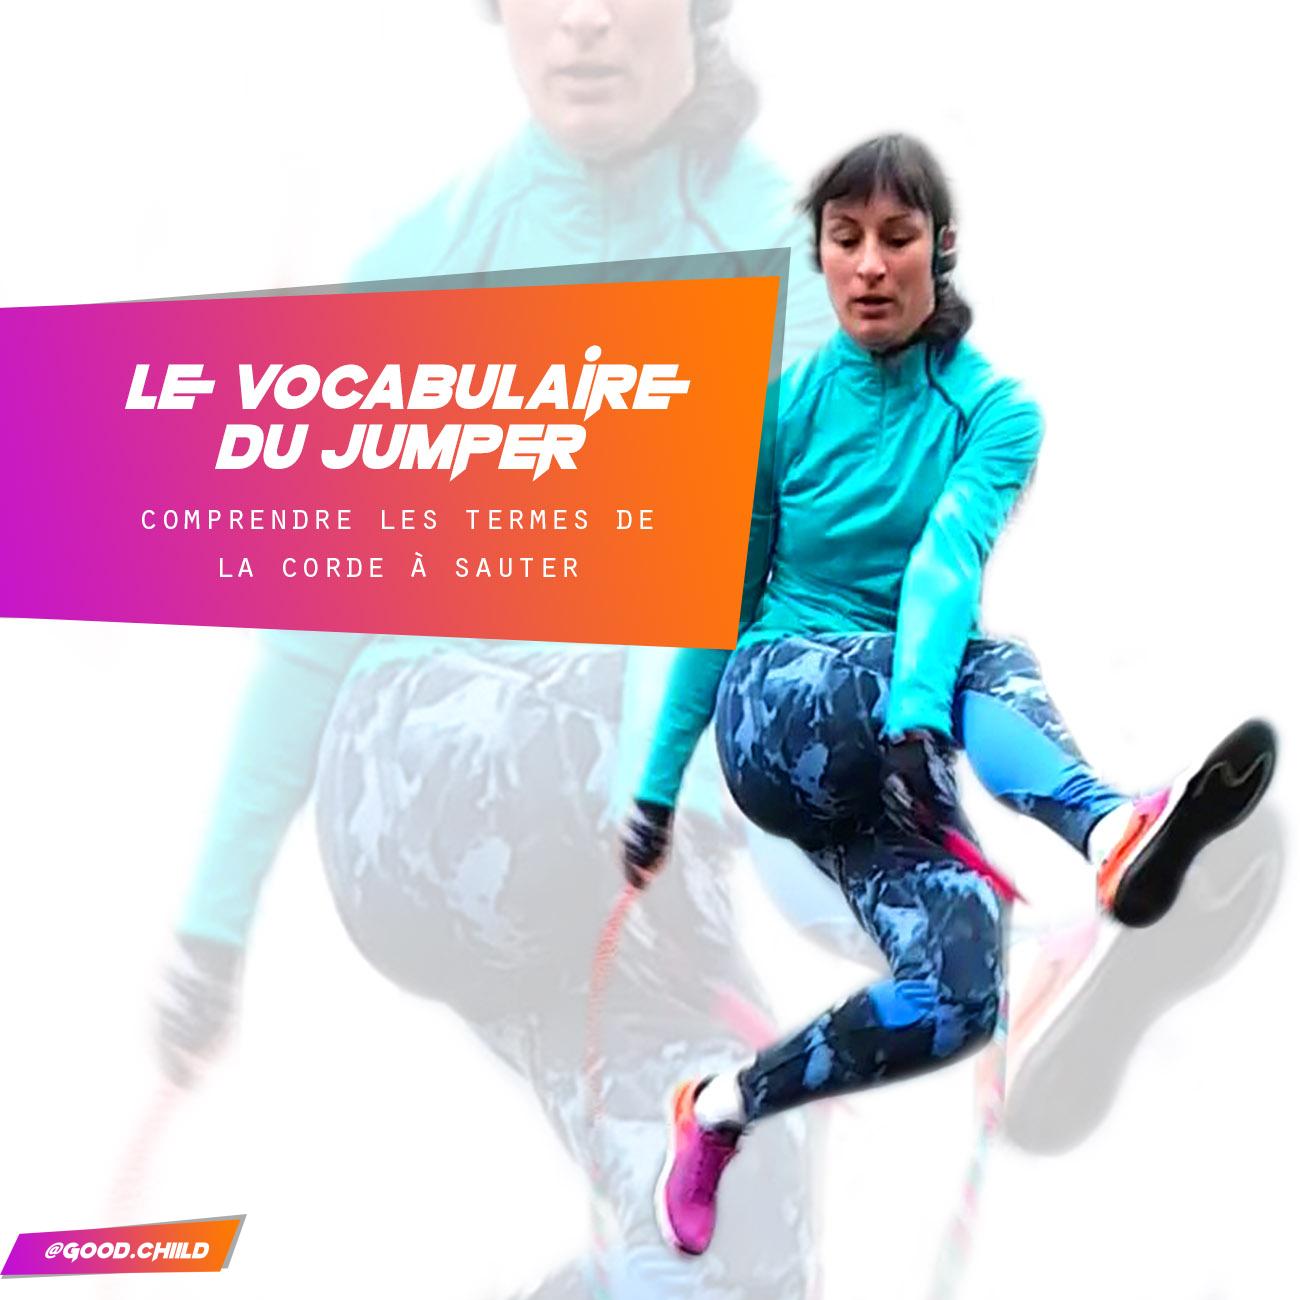 You are currently viewing Le vocabulaire du jumper